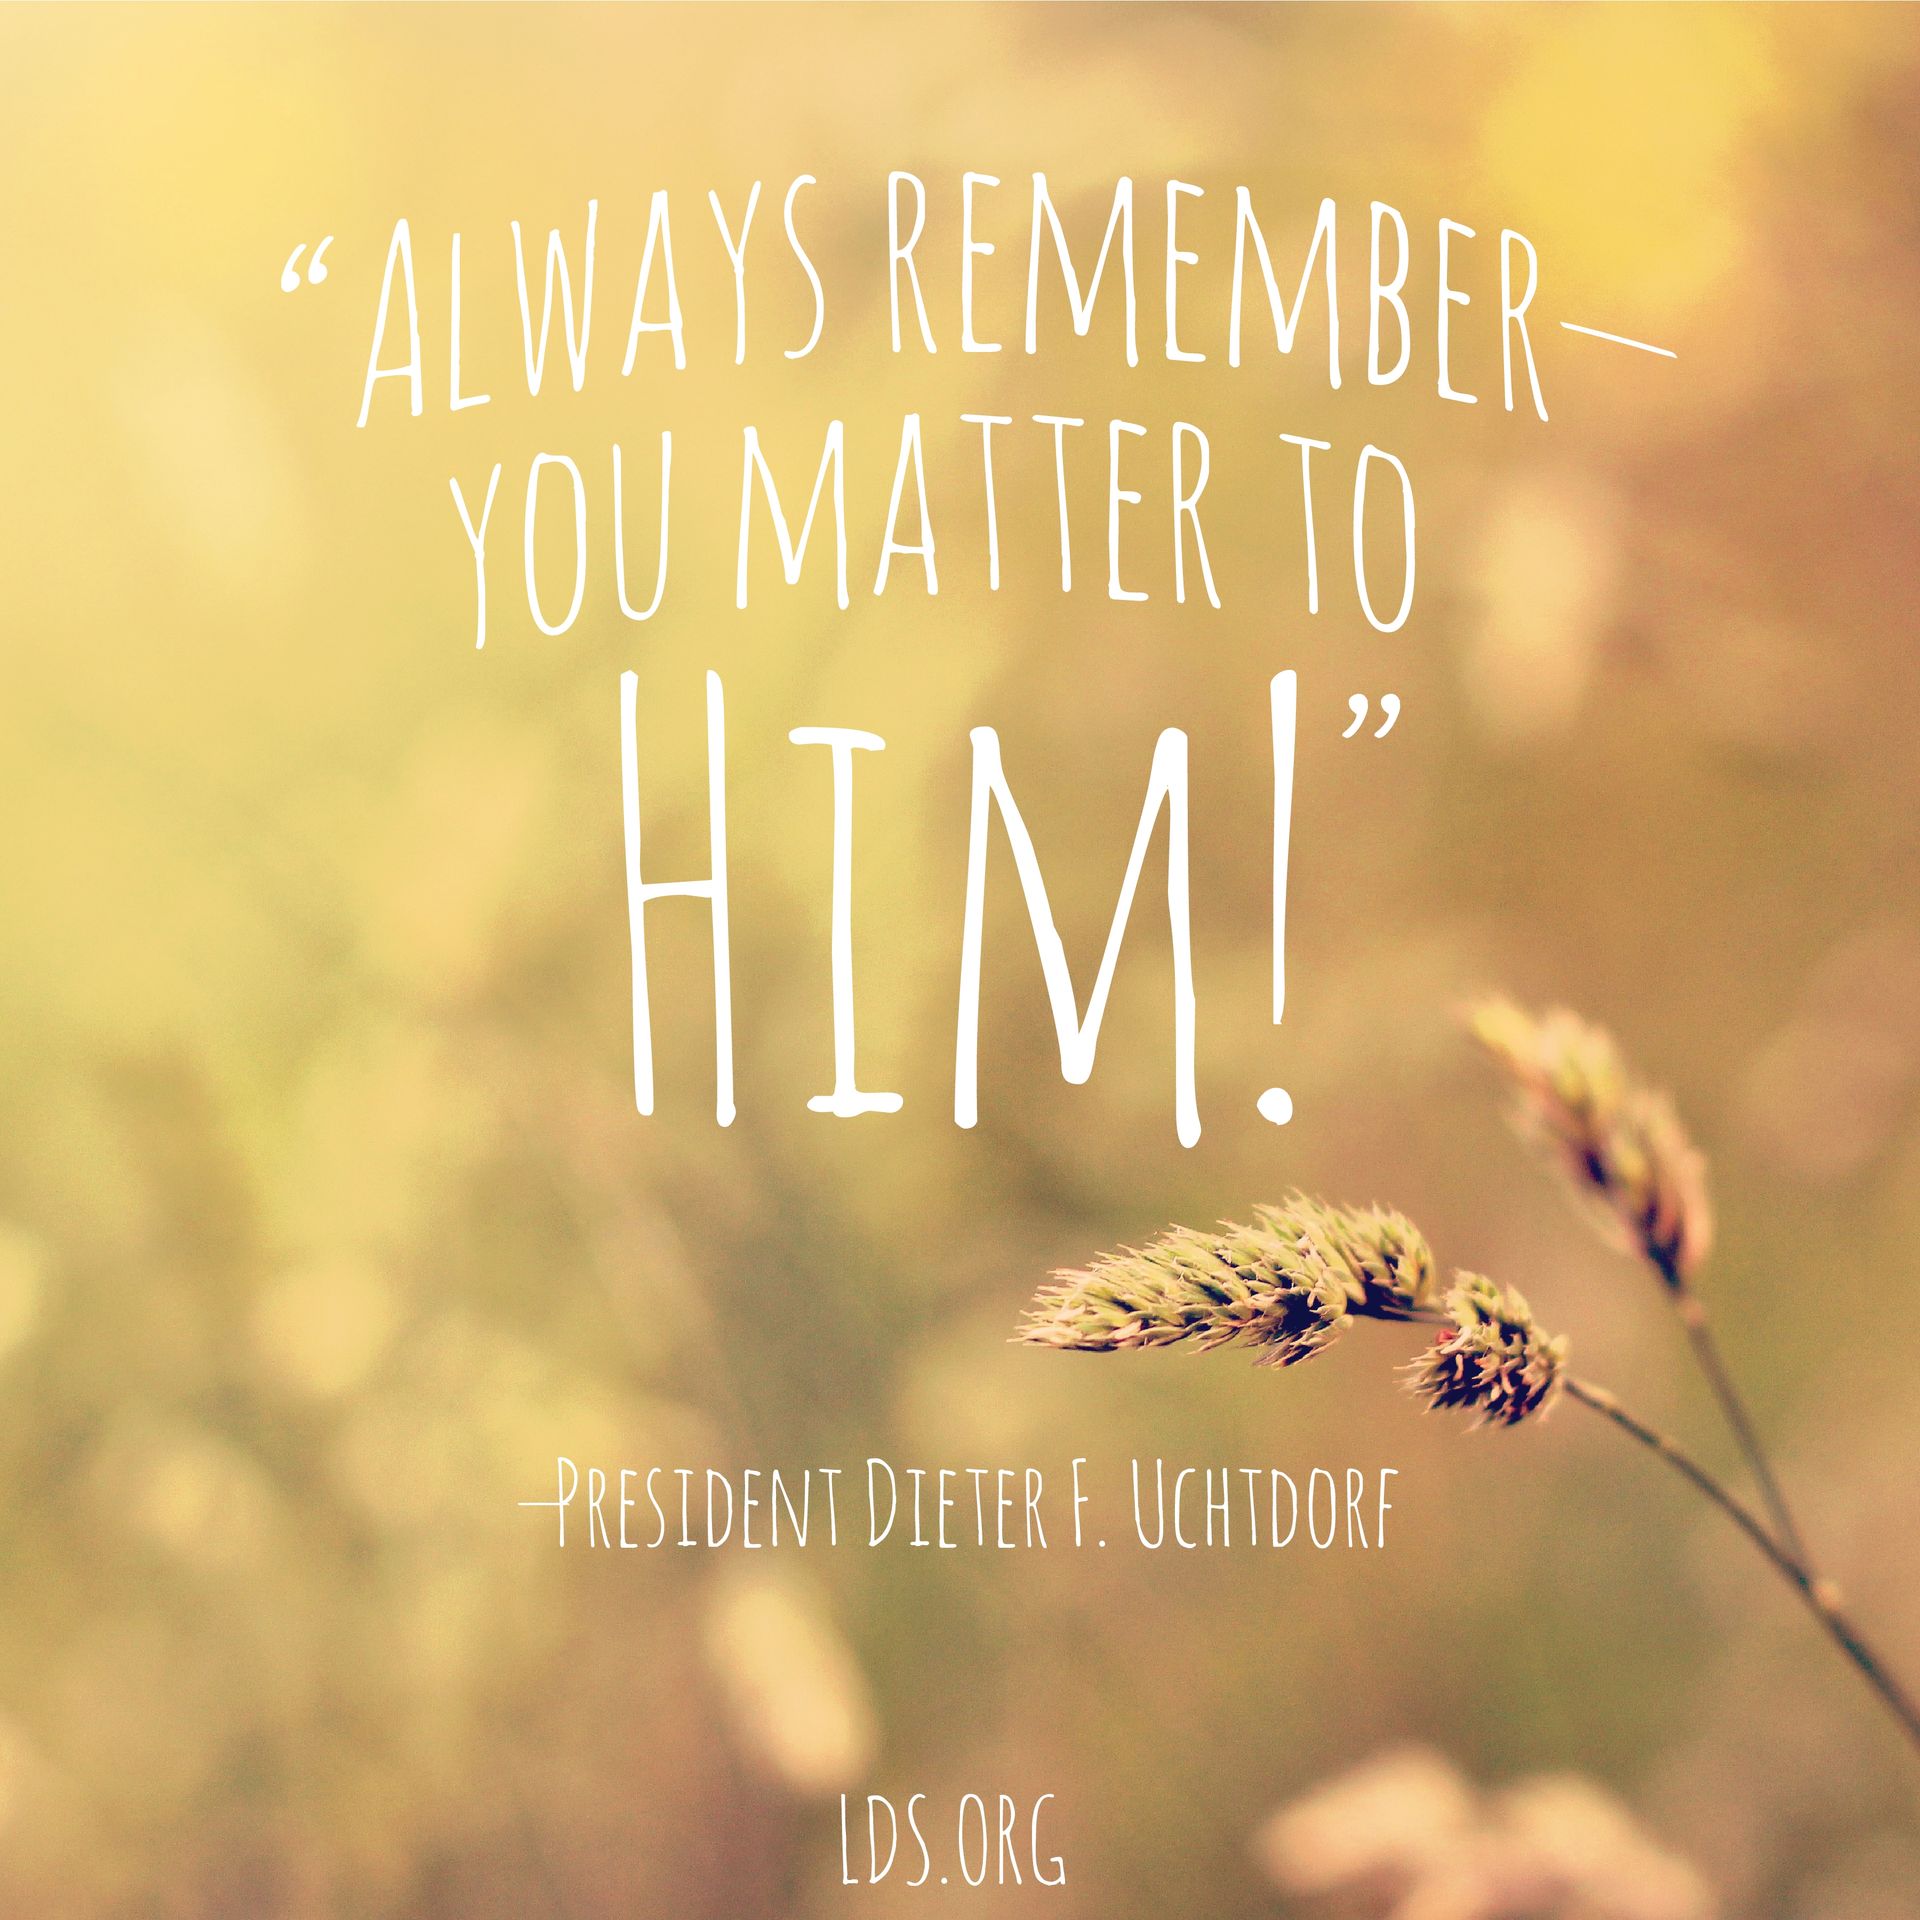 “Always remember—you matter to Him!”—President Dieter F. Uchtdorf, “You Matter to Him” © undefined ipCode 1.